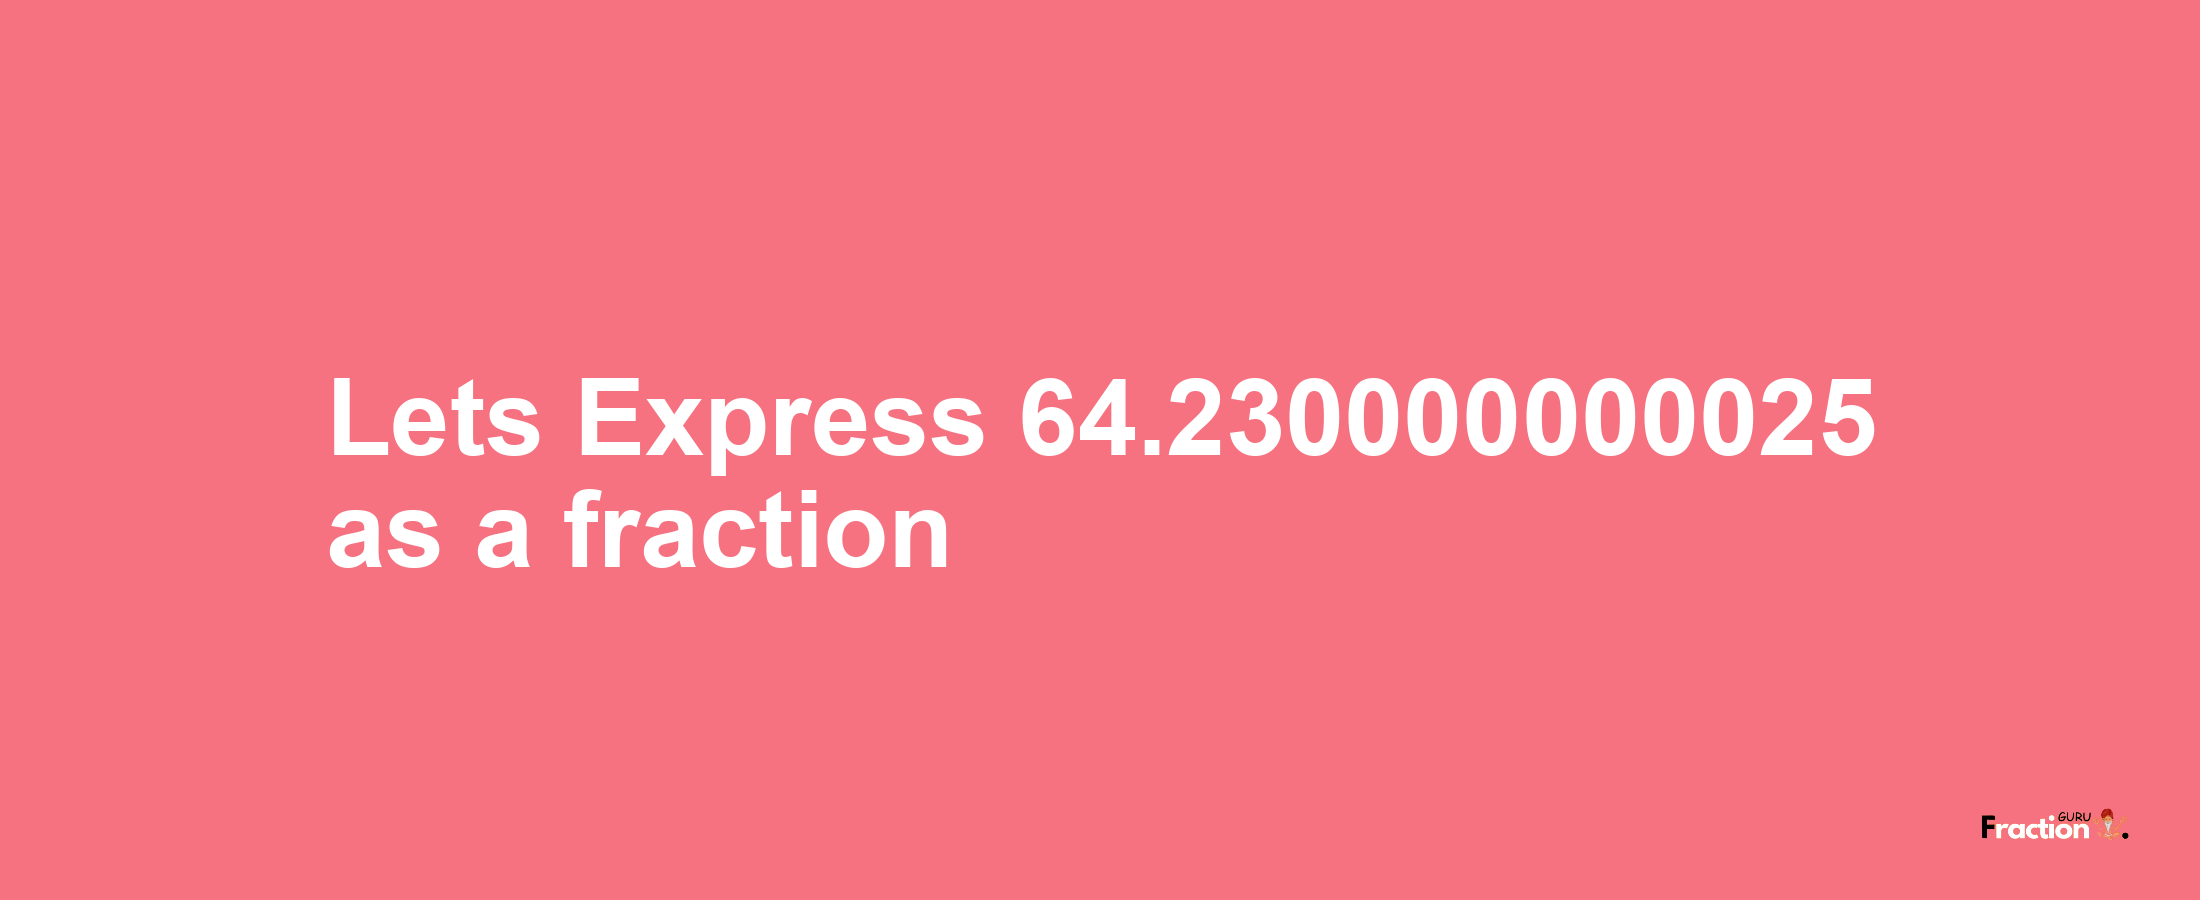 Lets Express 64.230000000025 as afraction